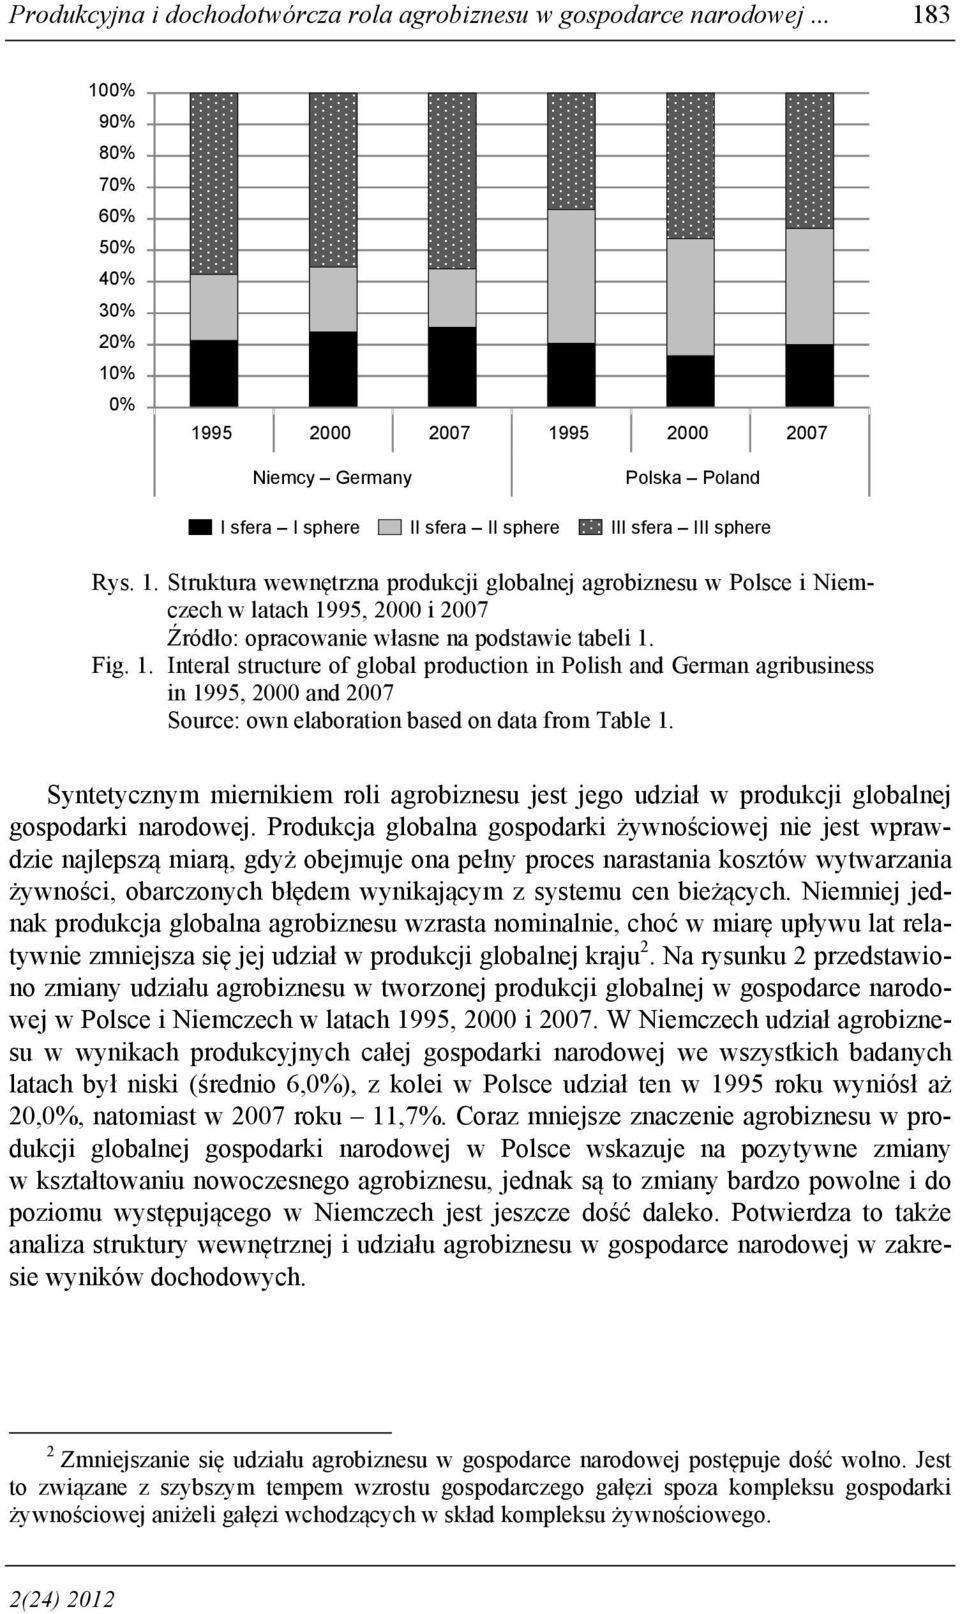 Fig. 1. Interal structure of global production in Polish and German agribusiness in 1995, 2000 and 2007 Source: own elaboration based on data from Table 1.